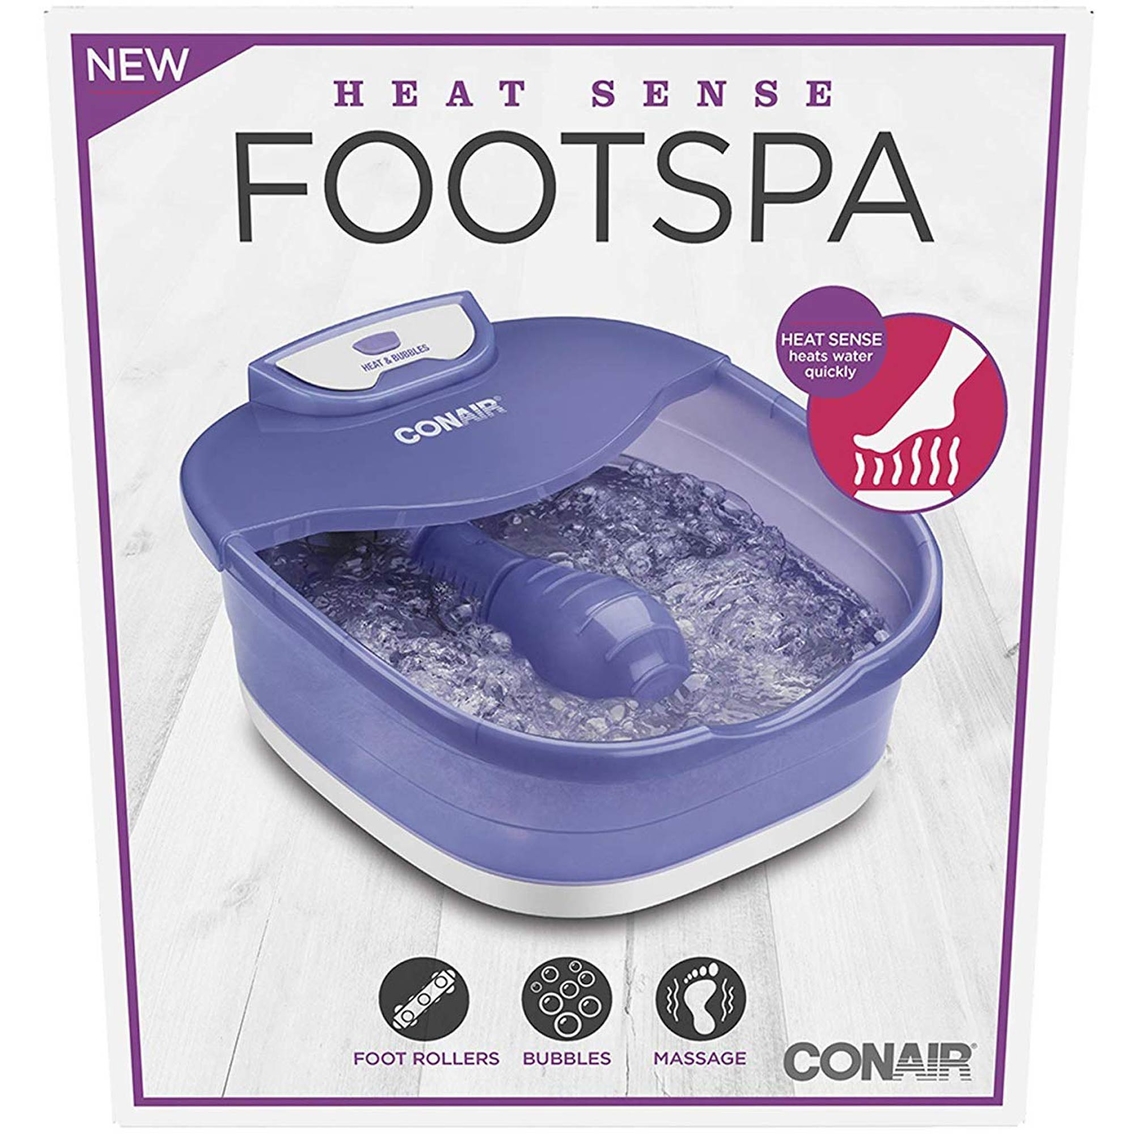 Conair Heat Sense Foot and Pedicure Spa with Heated Bubble Massage